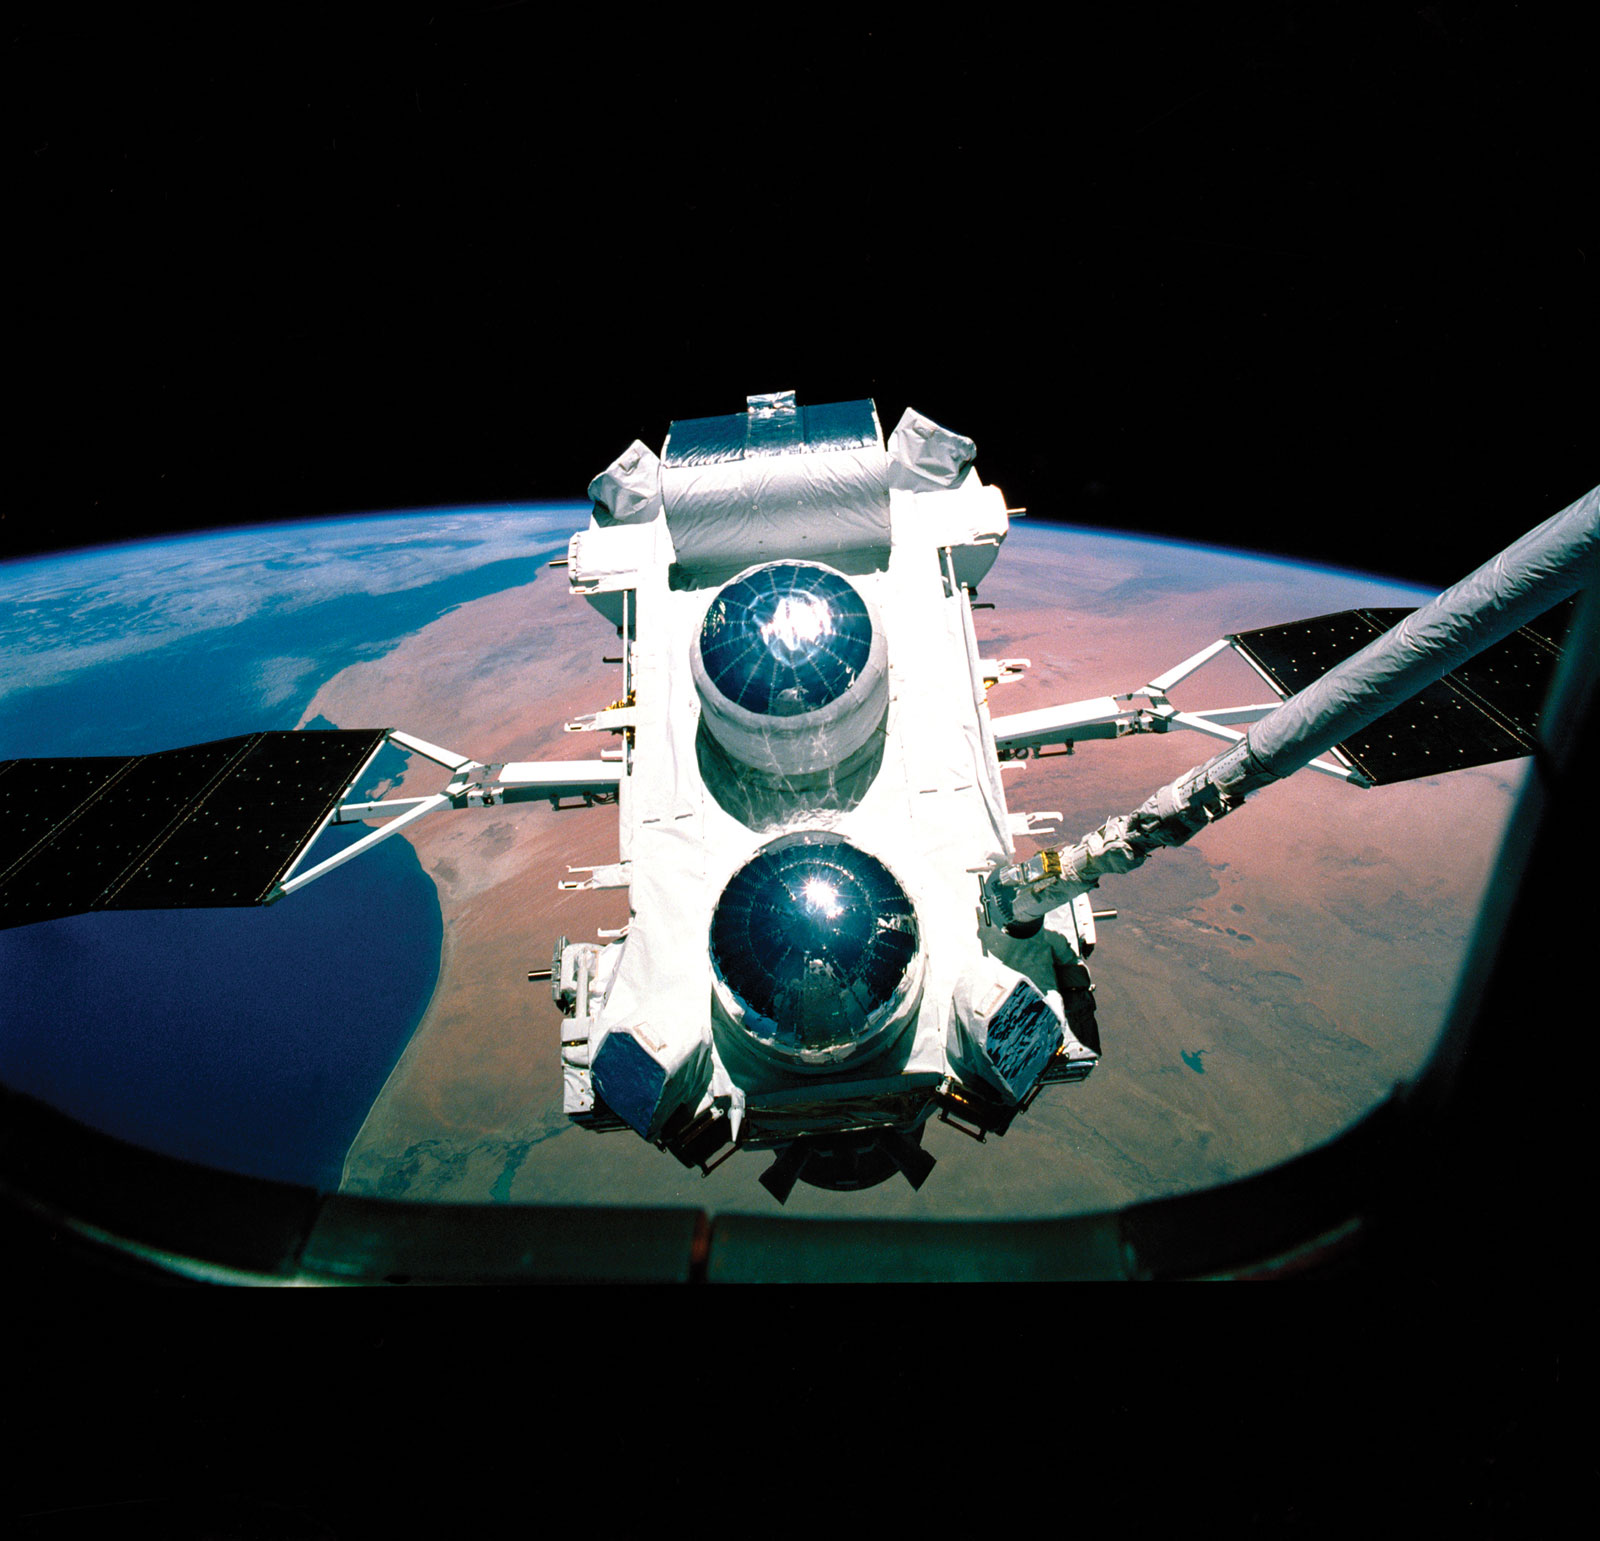 CGRO being deployed from the Space Shuttle Atlantis.